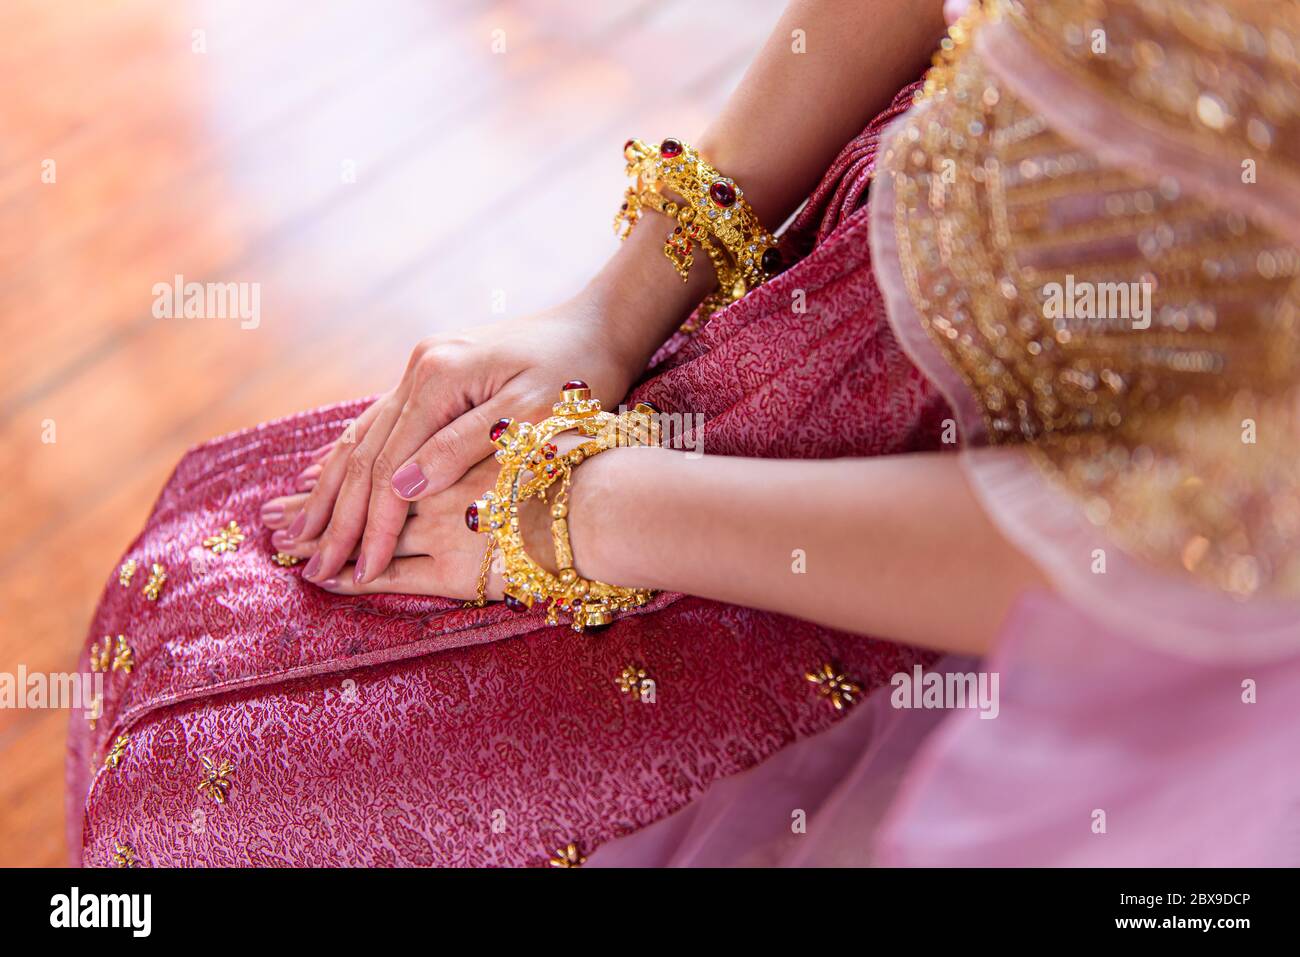 Asian Thai woman sitting with clasp hands legs crossed on the floor in traditional dress Stock Photo